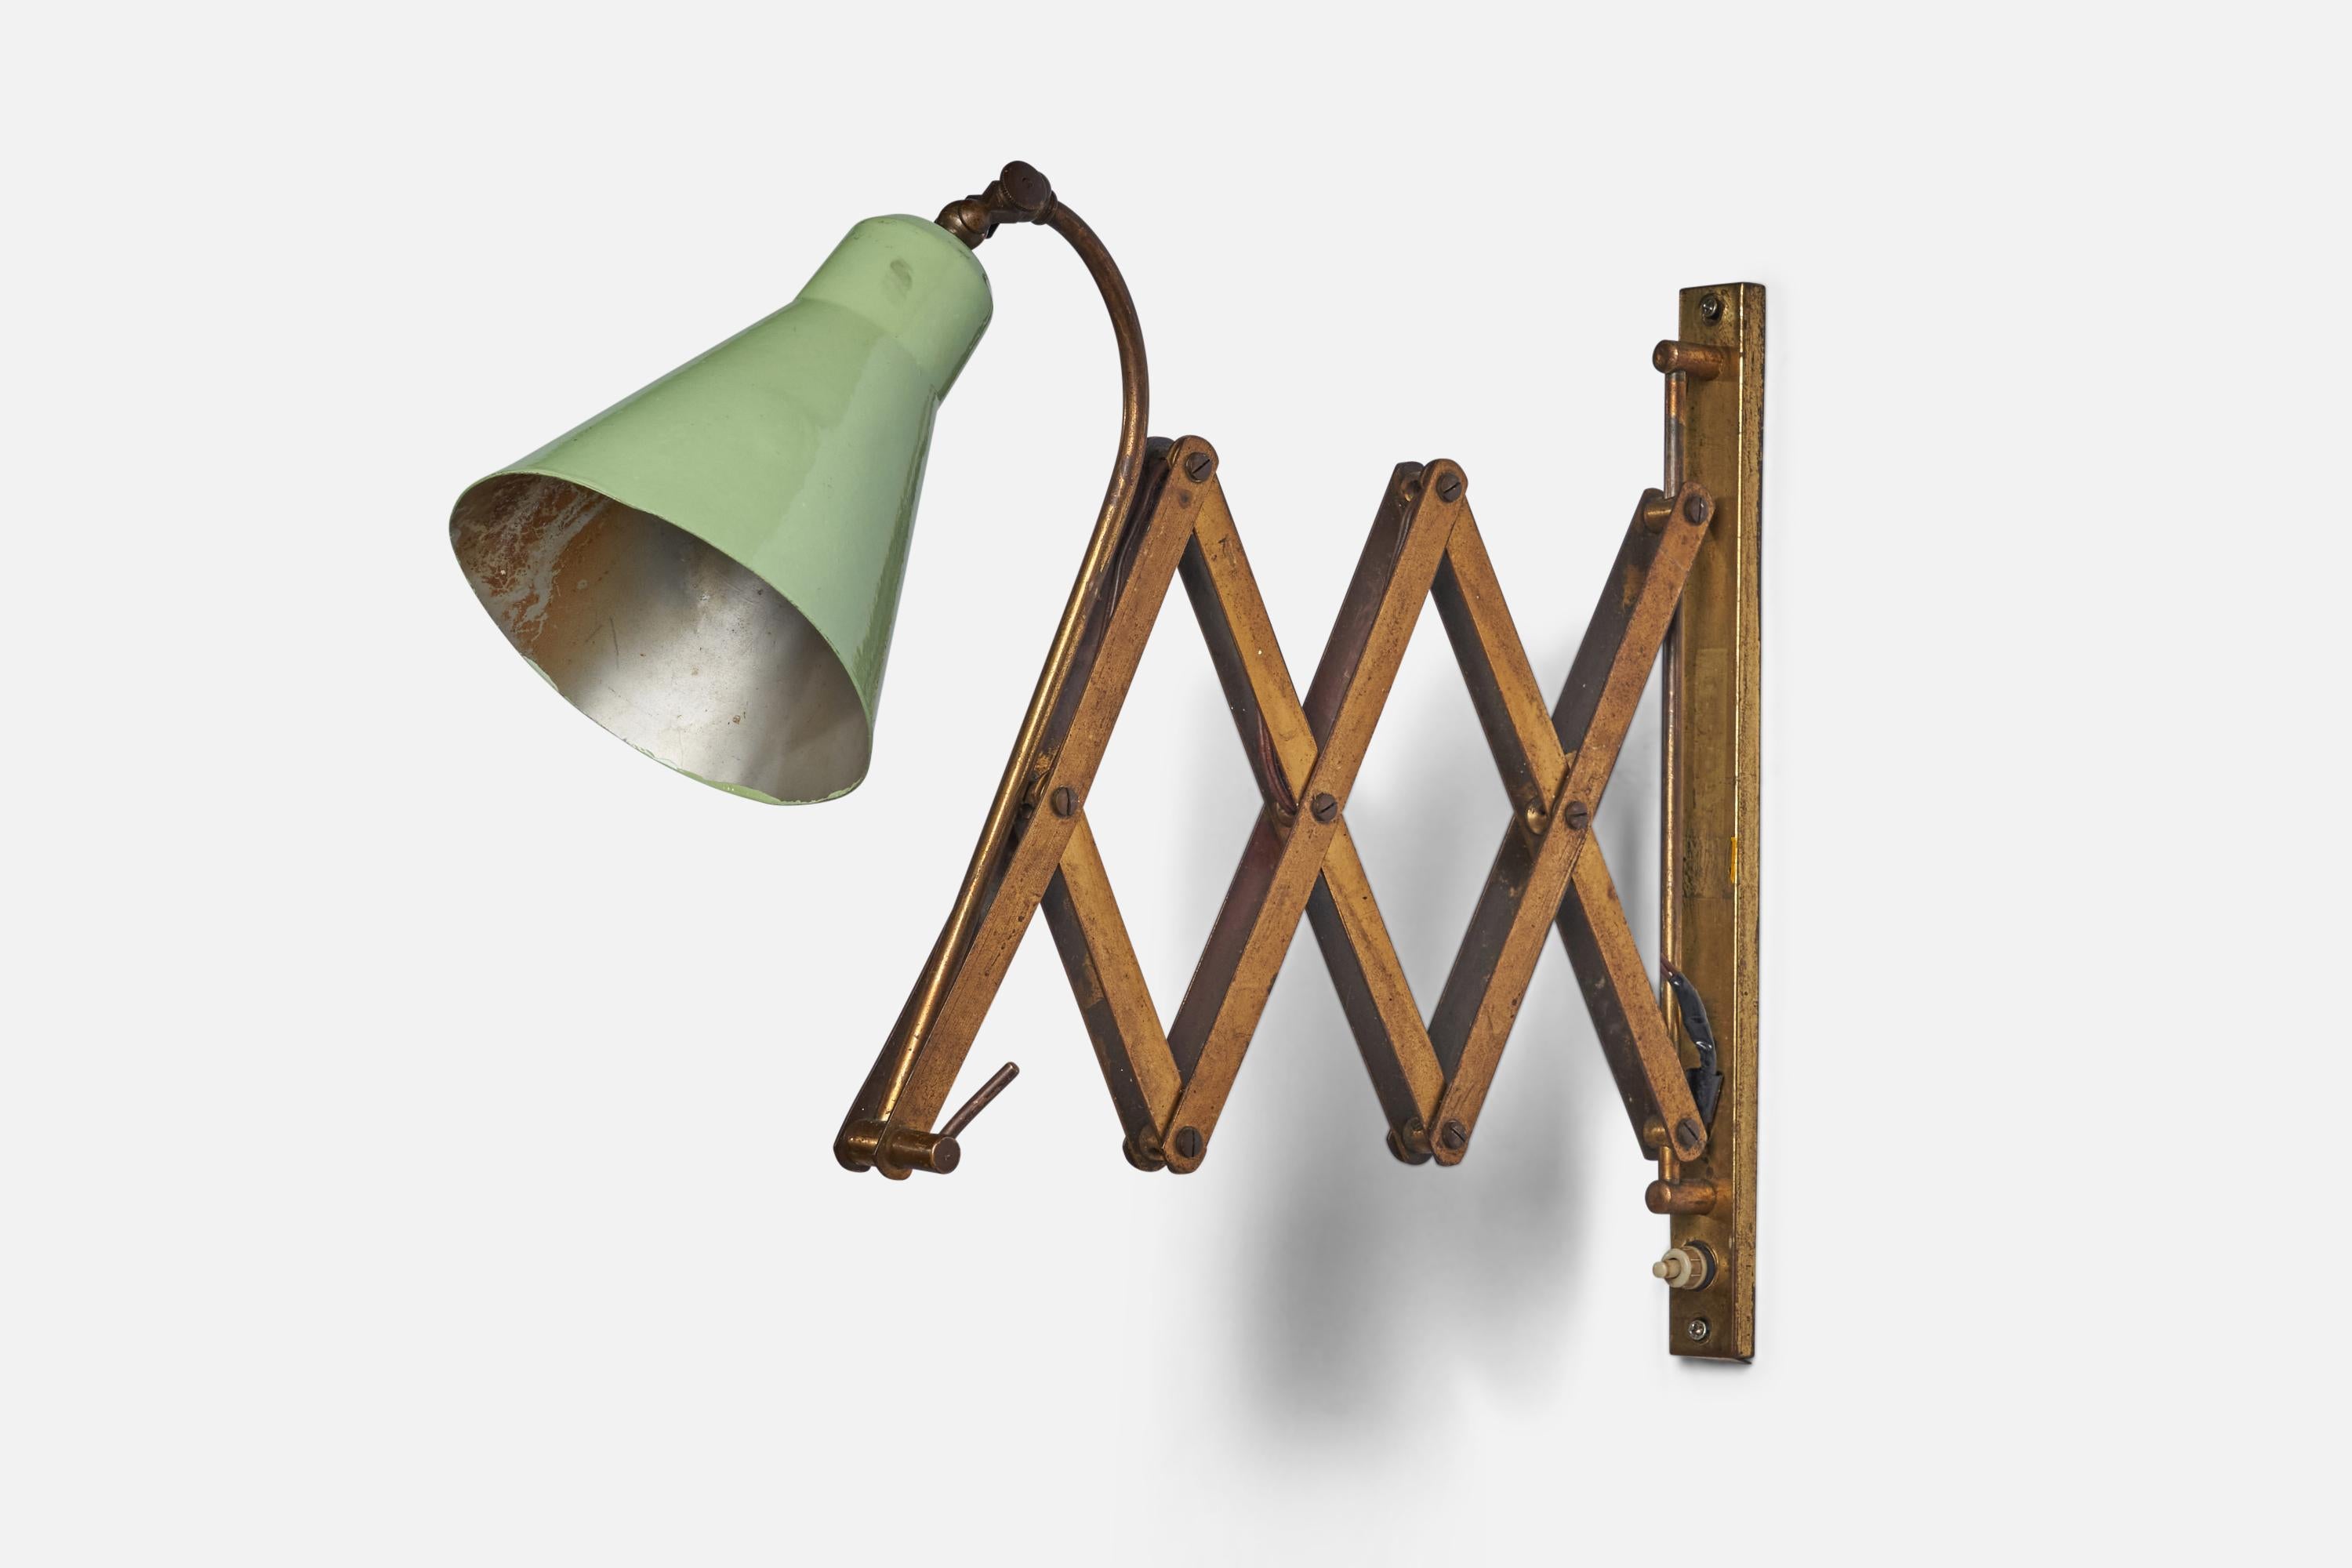 A brass and green-lacquered metal wall light designed and produced in Italy, 1940s.

Collapsed Dimensions (inches): 13.25” H x 5” W x 14” D
Fully Extended Dimensions (inches): 17” H x 5” W x 36” D
Back Plate Dimensions (inches): 13.5” H x 1.15”